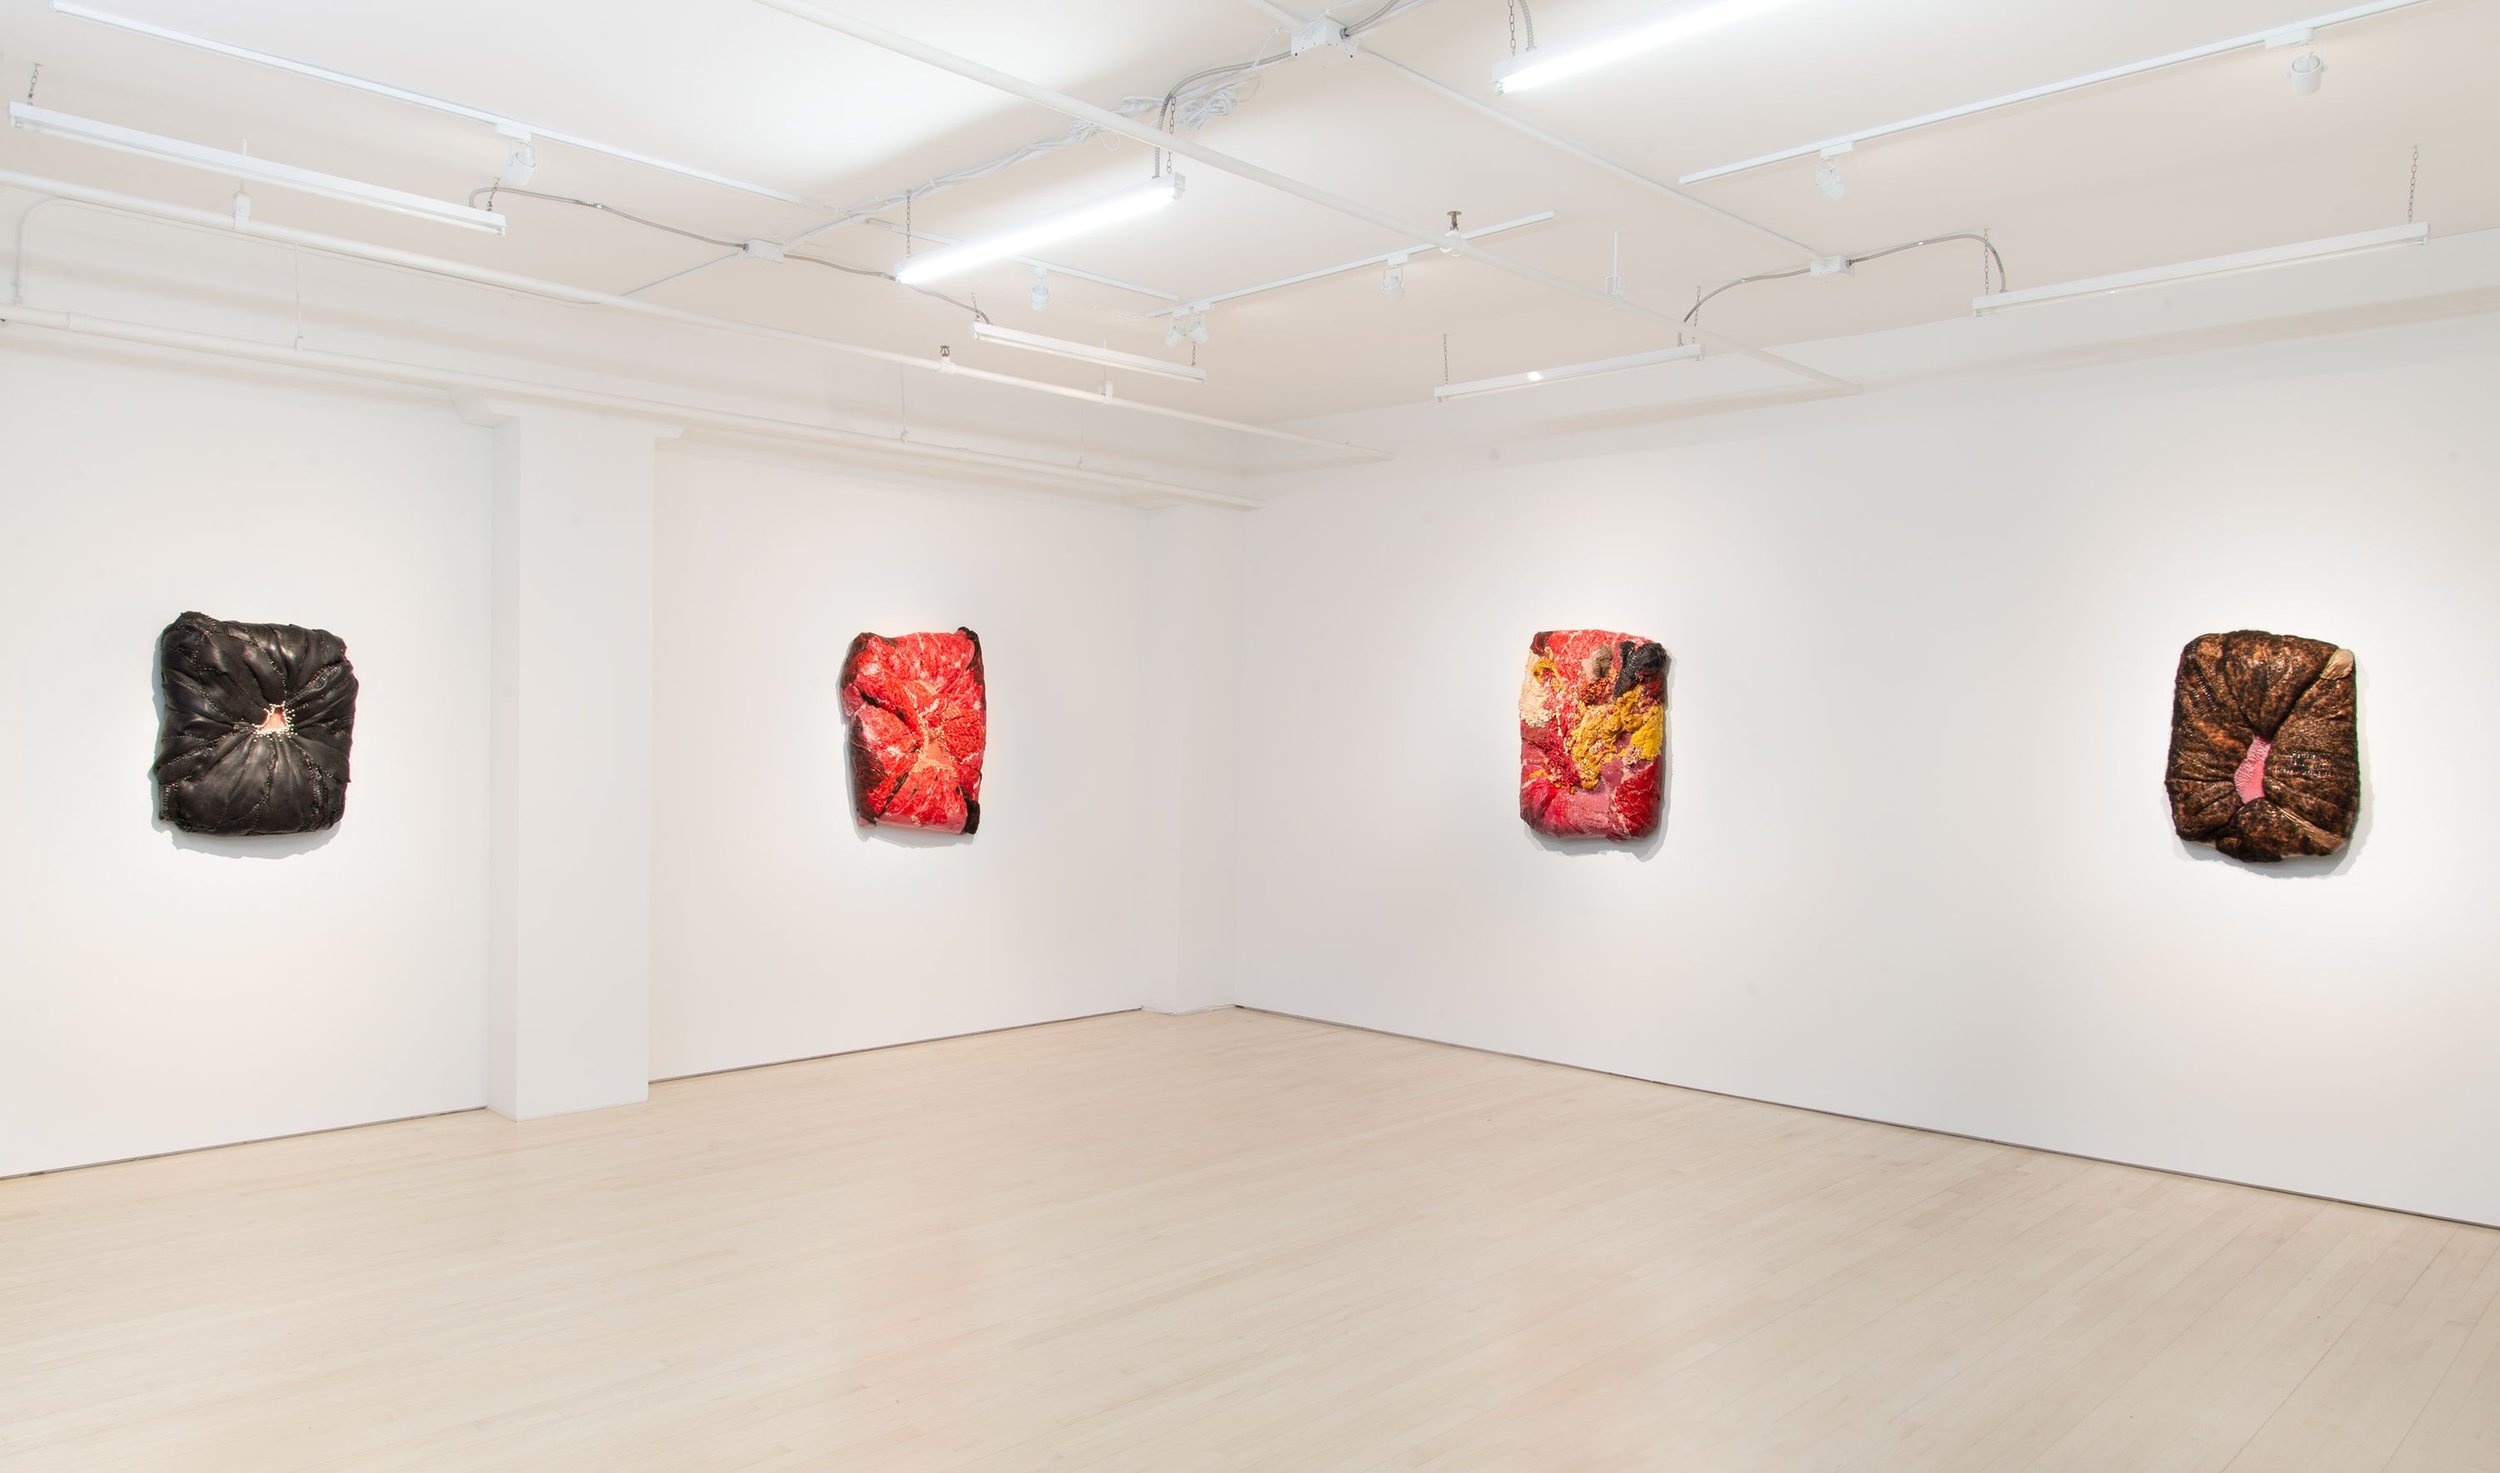 installation view, The Remains, JTT, New York